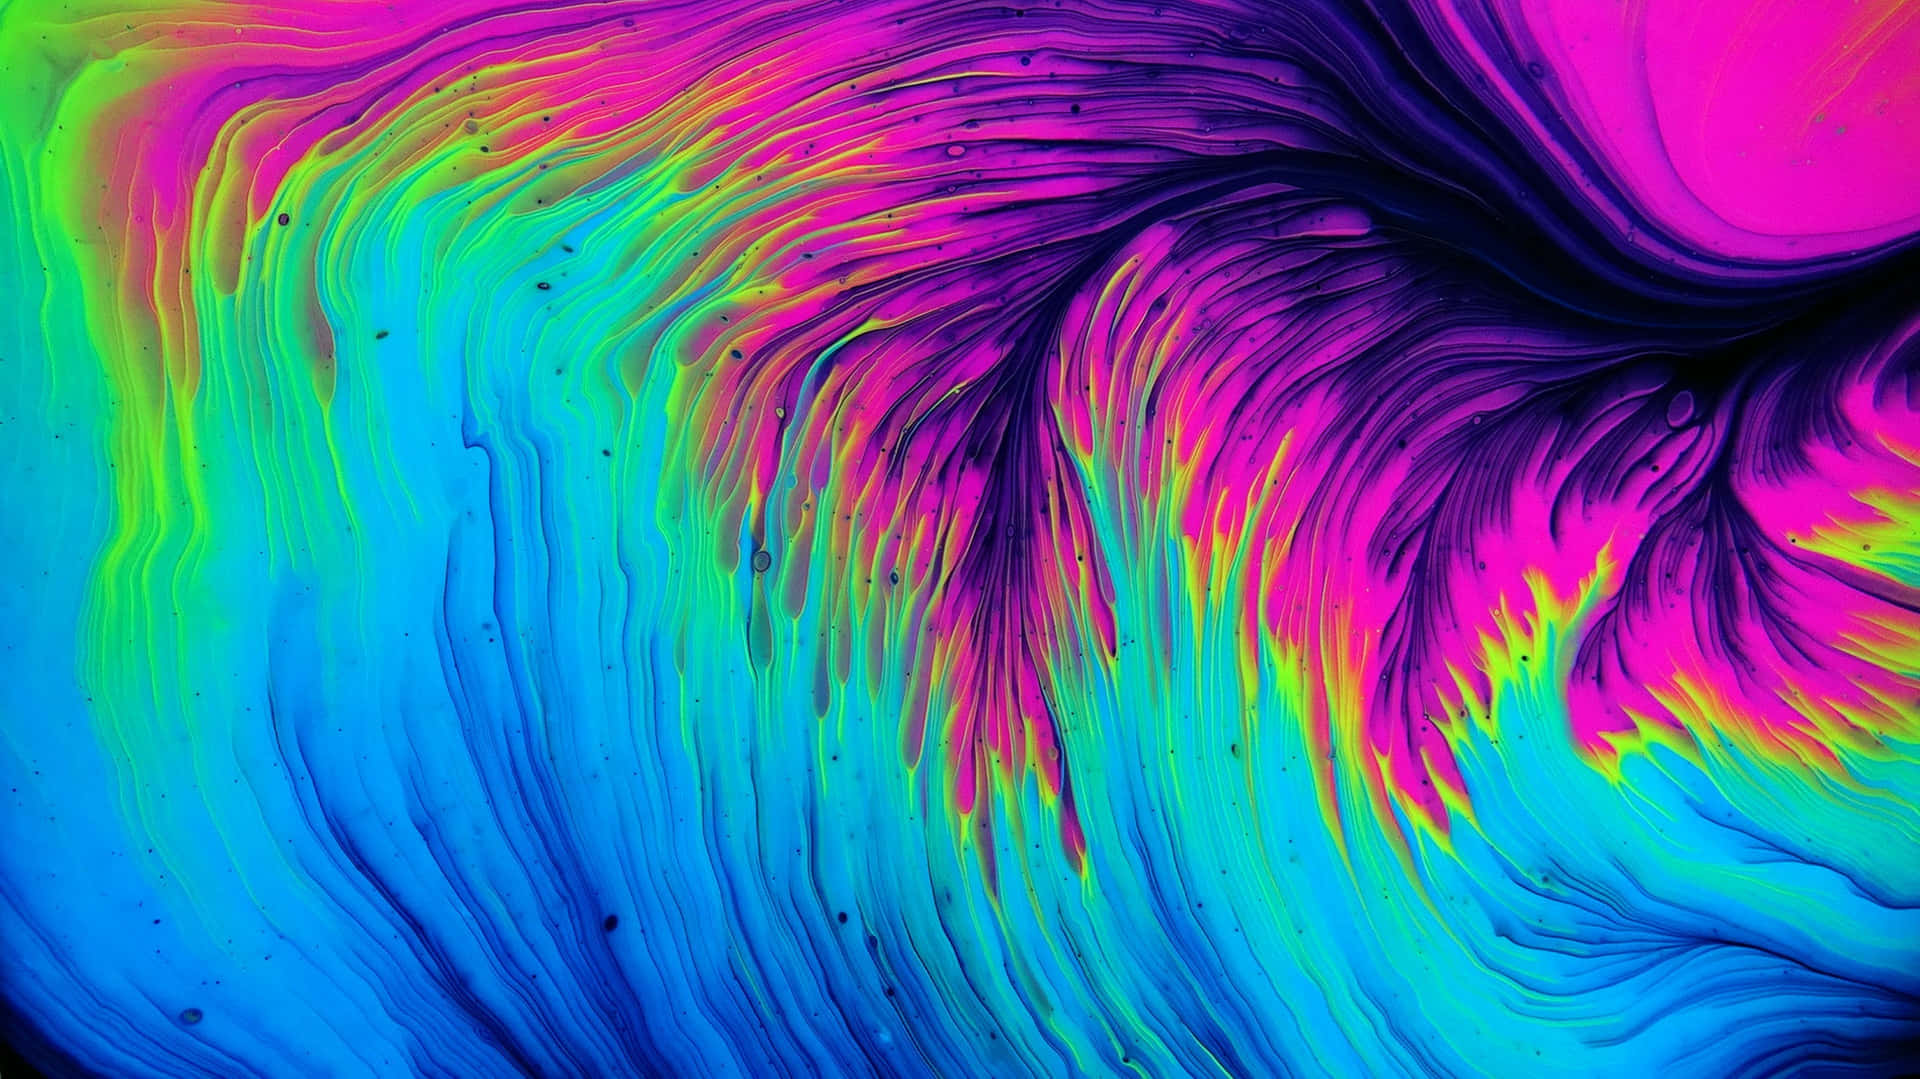 Neon Colorful Abstract Art Wallpaper